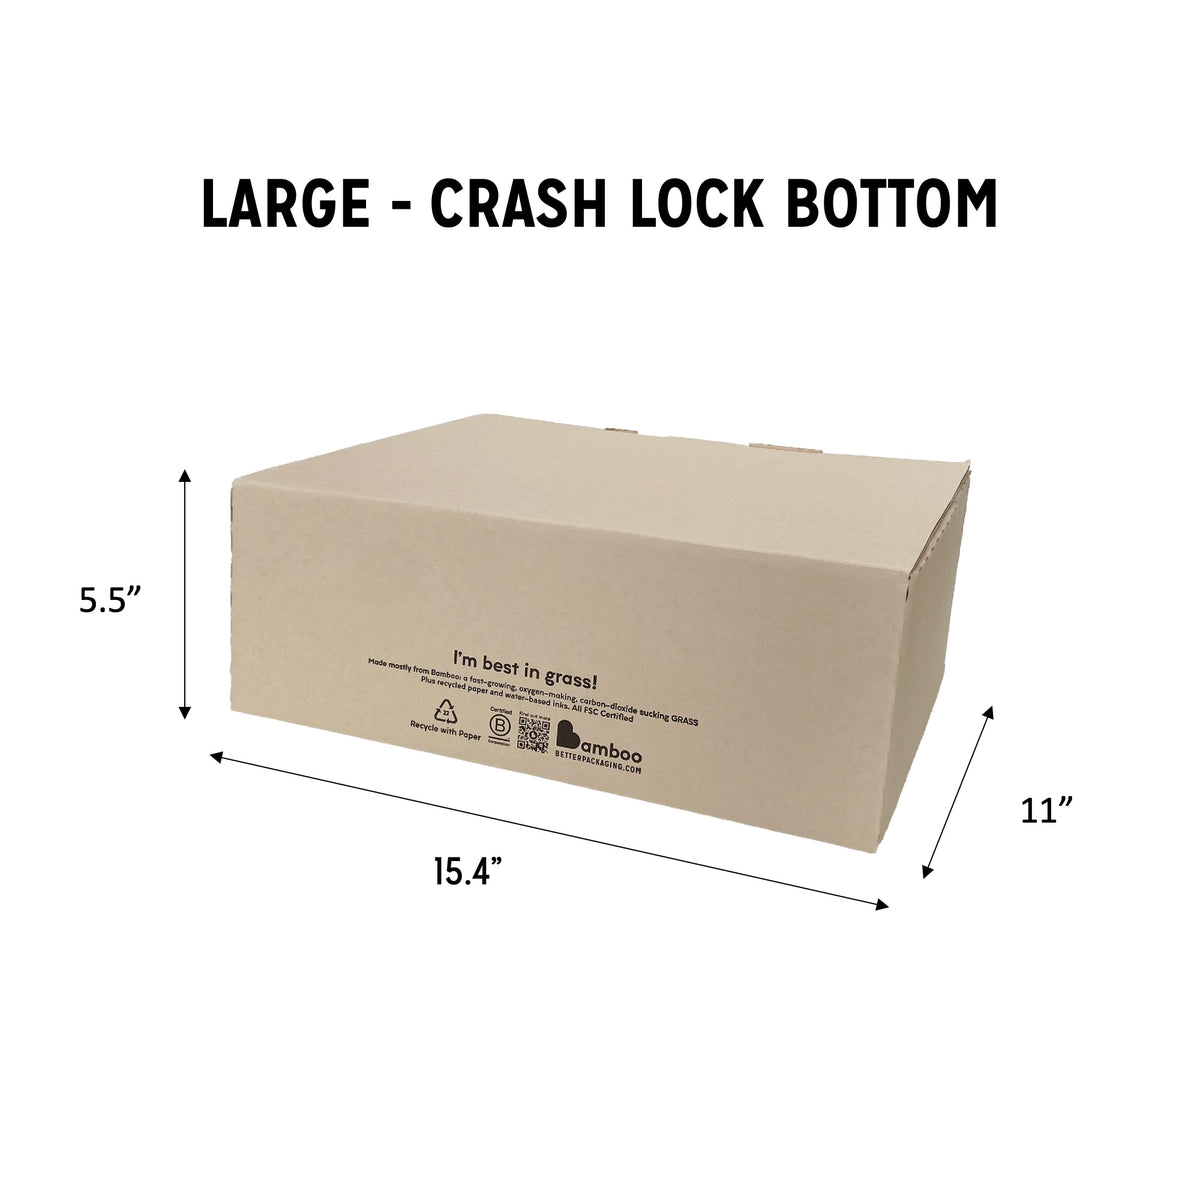 Large sized crash lock Better Packaging bamboo box. 5.5&quot; high, 15.4&quot; wide, 11&quot; deep